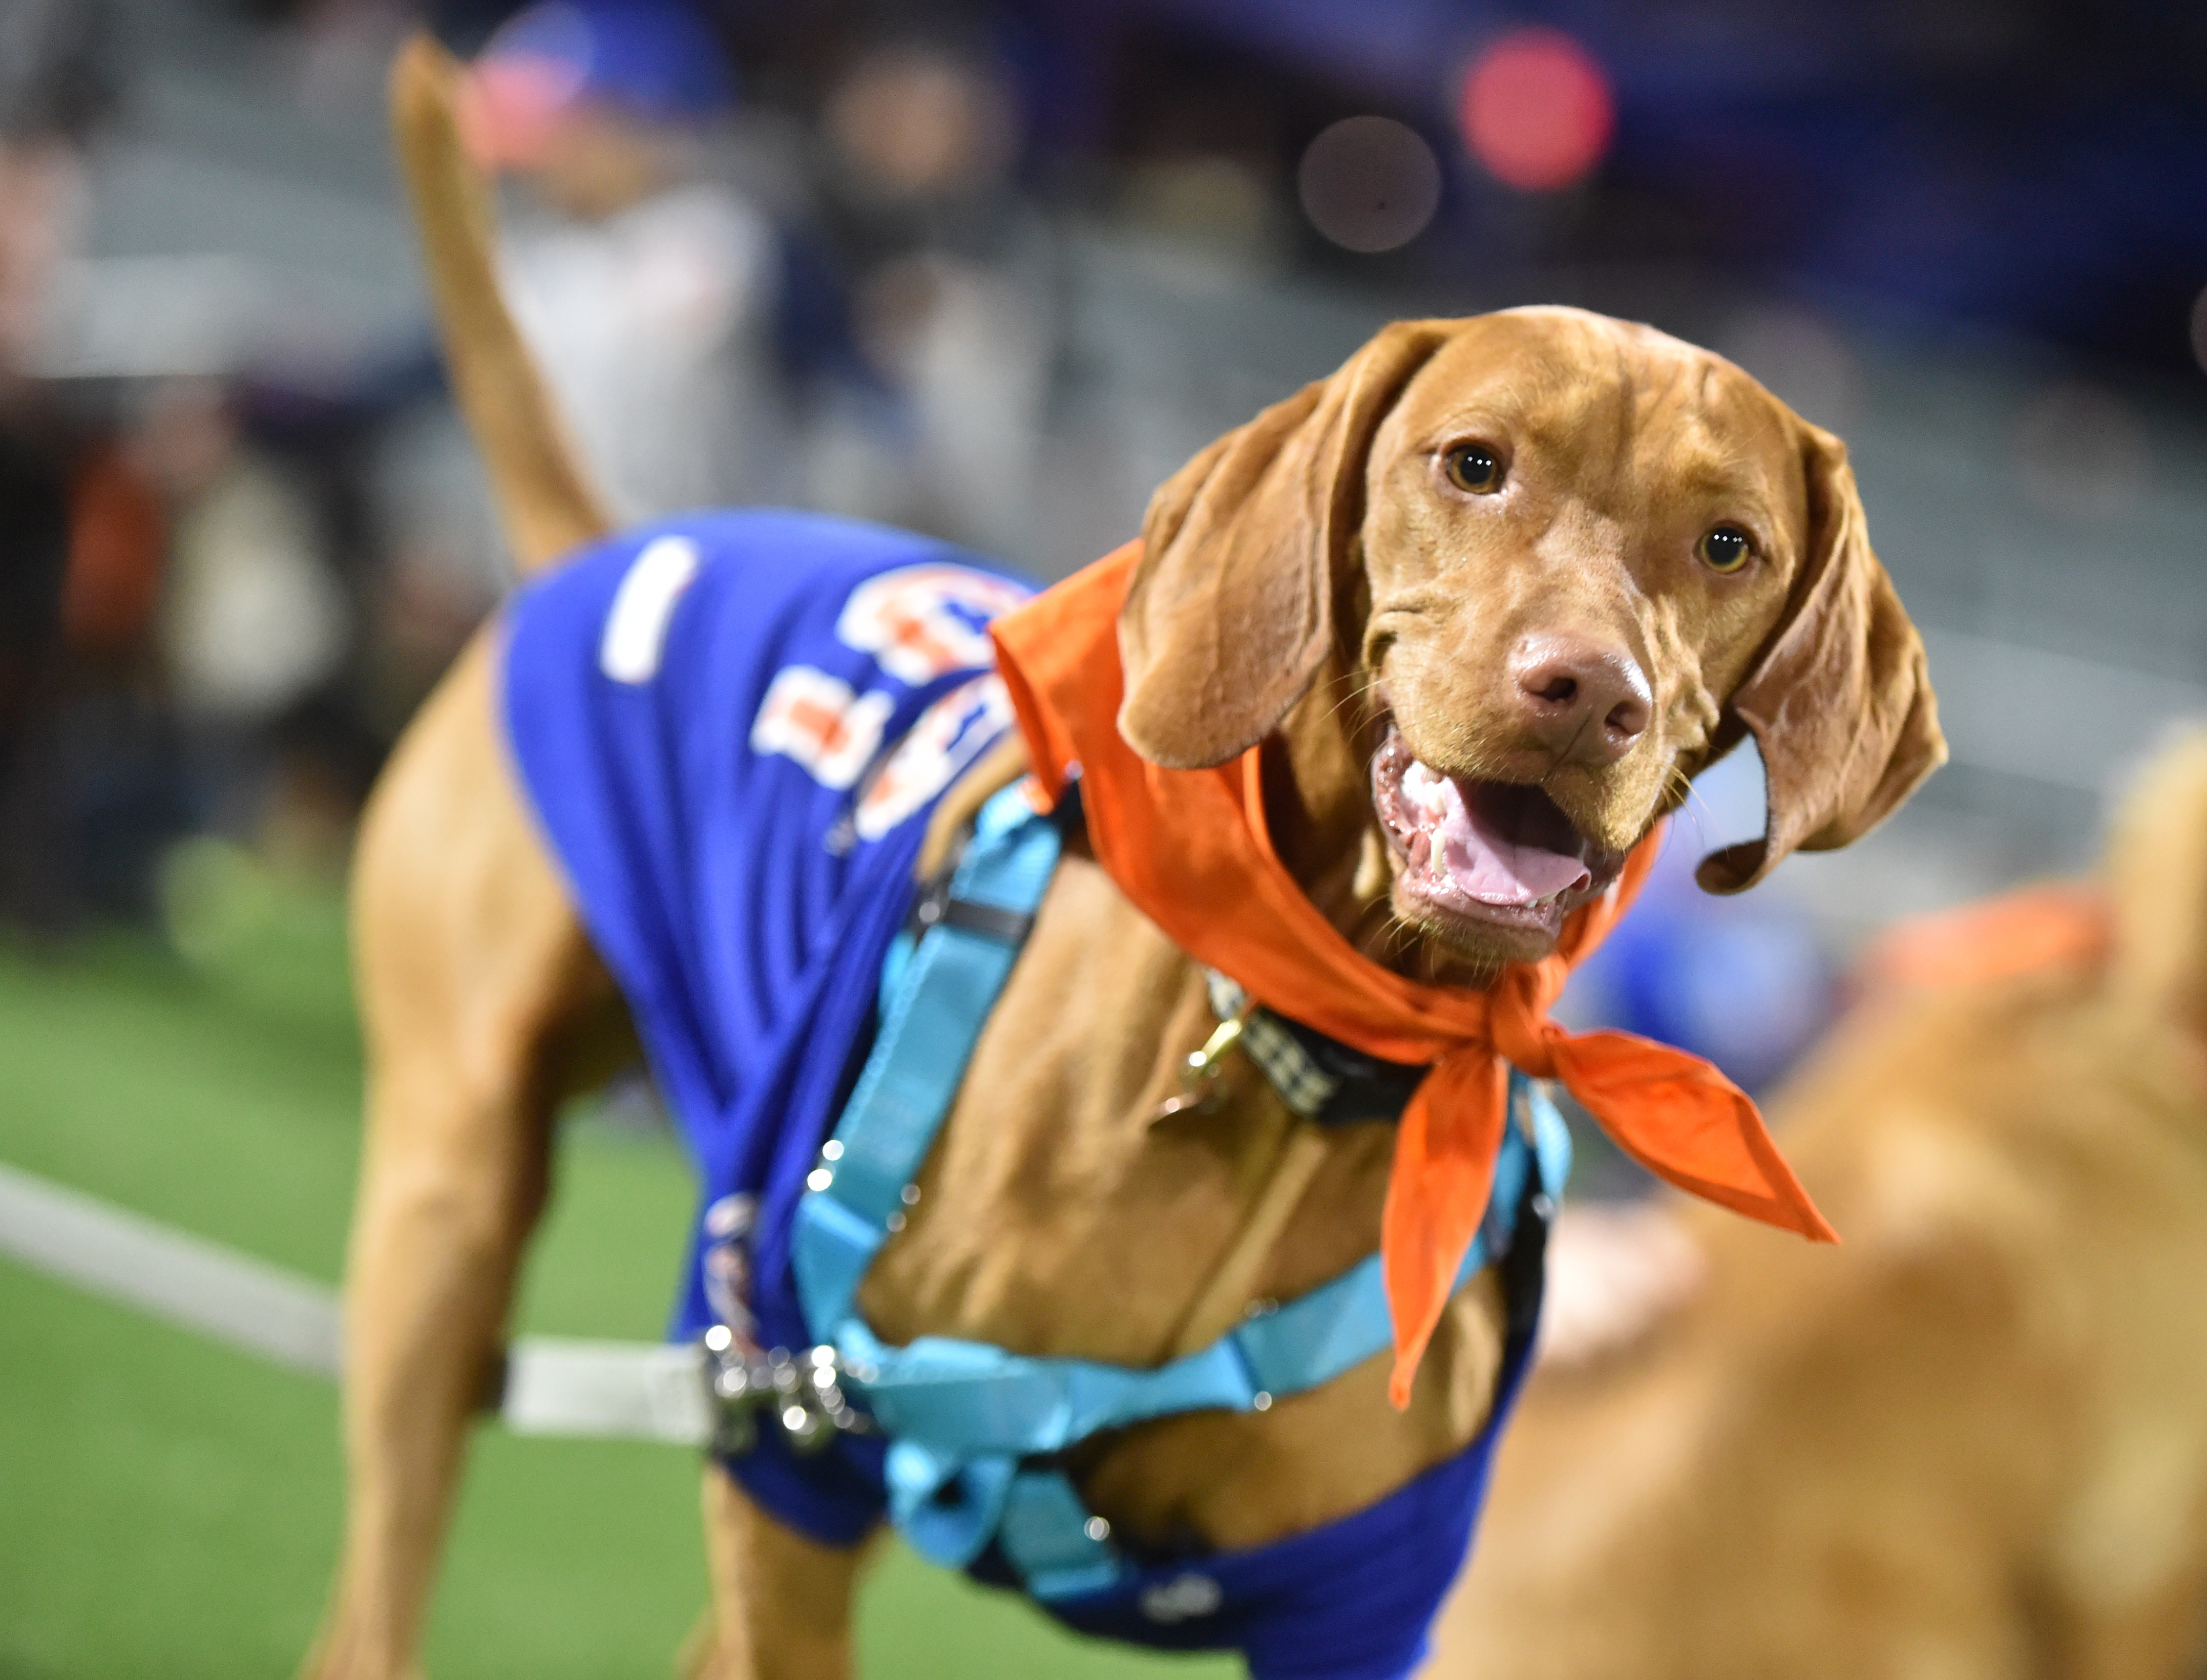 Syracuse Mets to Host Bark in the Park #2 & #3, September 15th & 29th